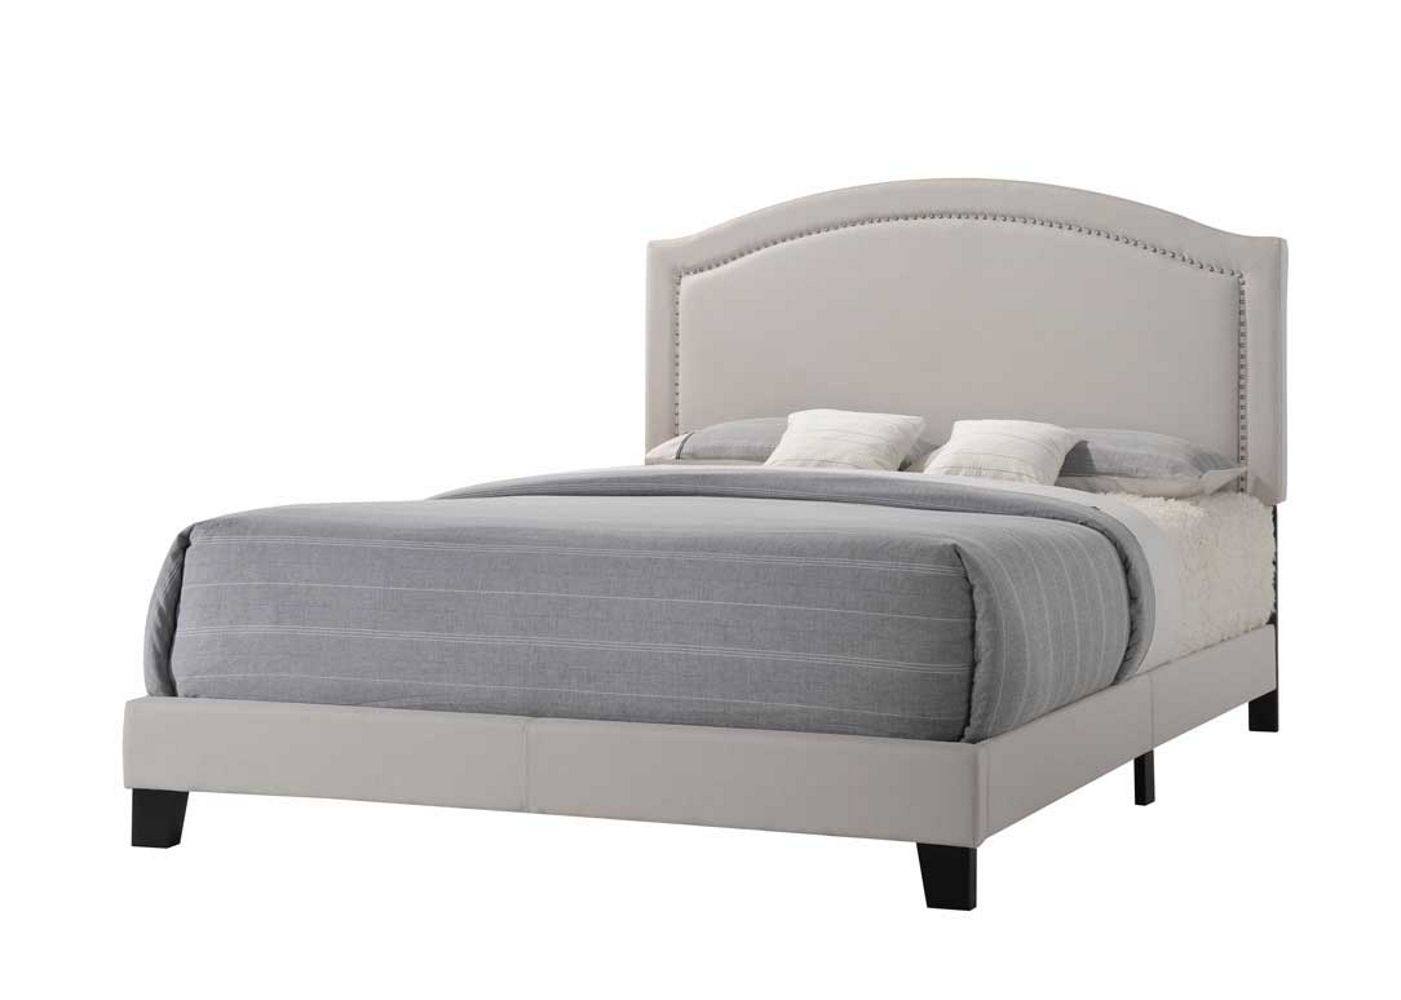 Gray Queen Size Upholstered Nailhead Trim Platform Bed with Dark Wood Finish Legs